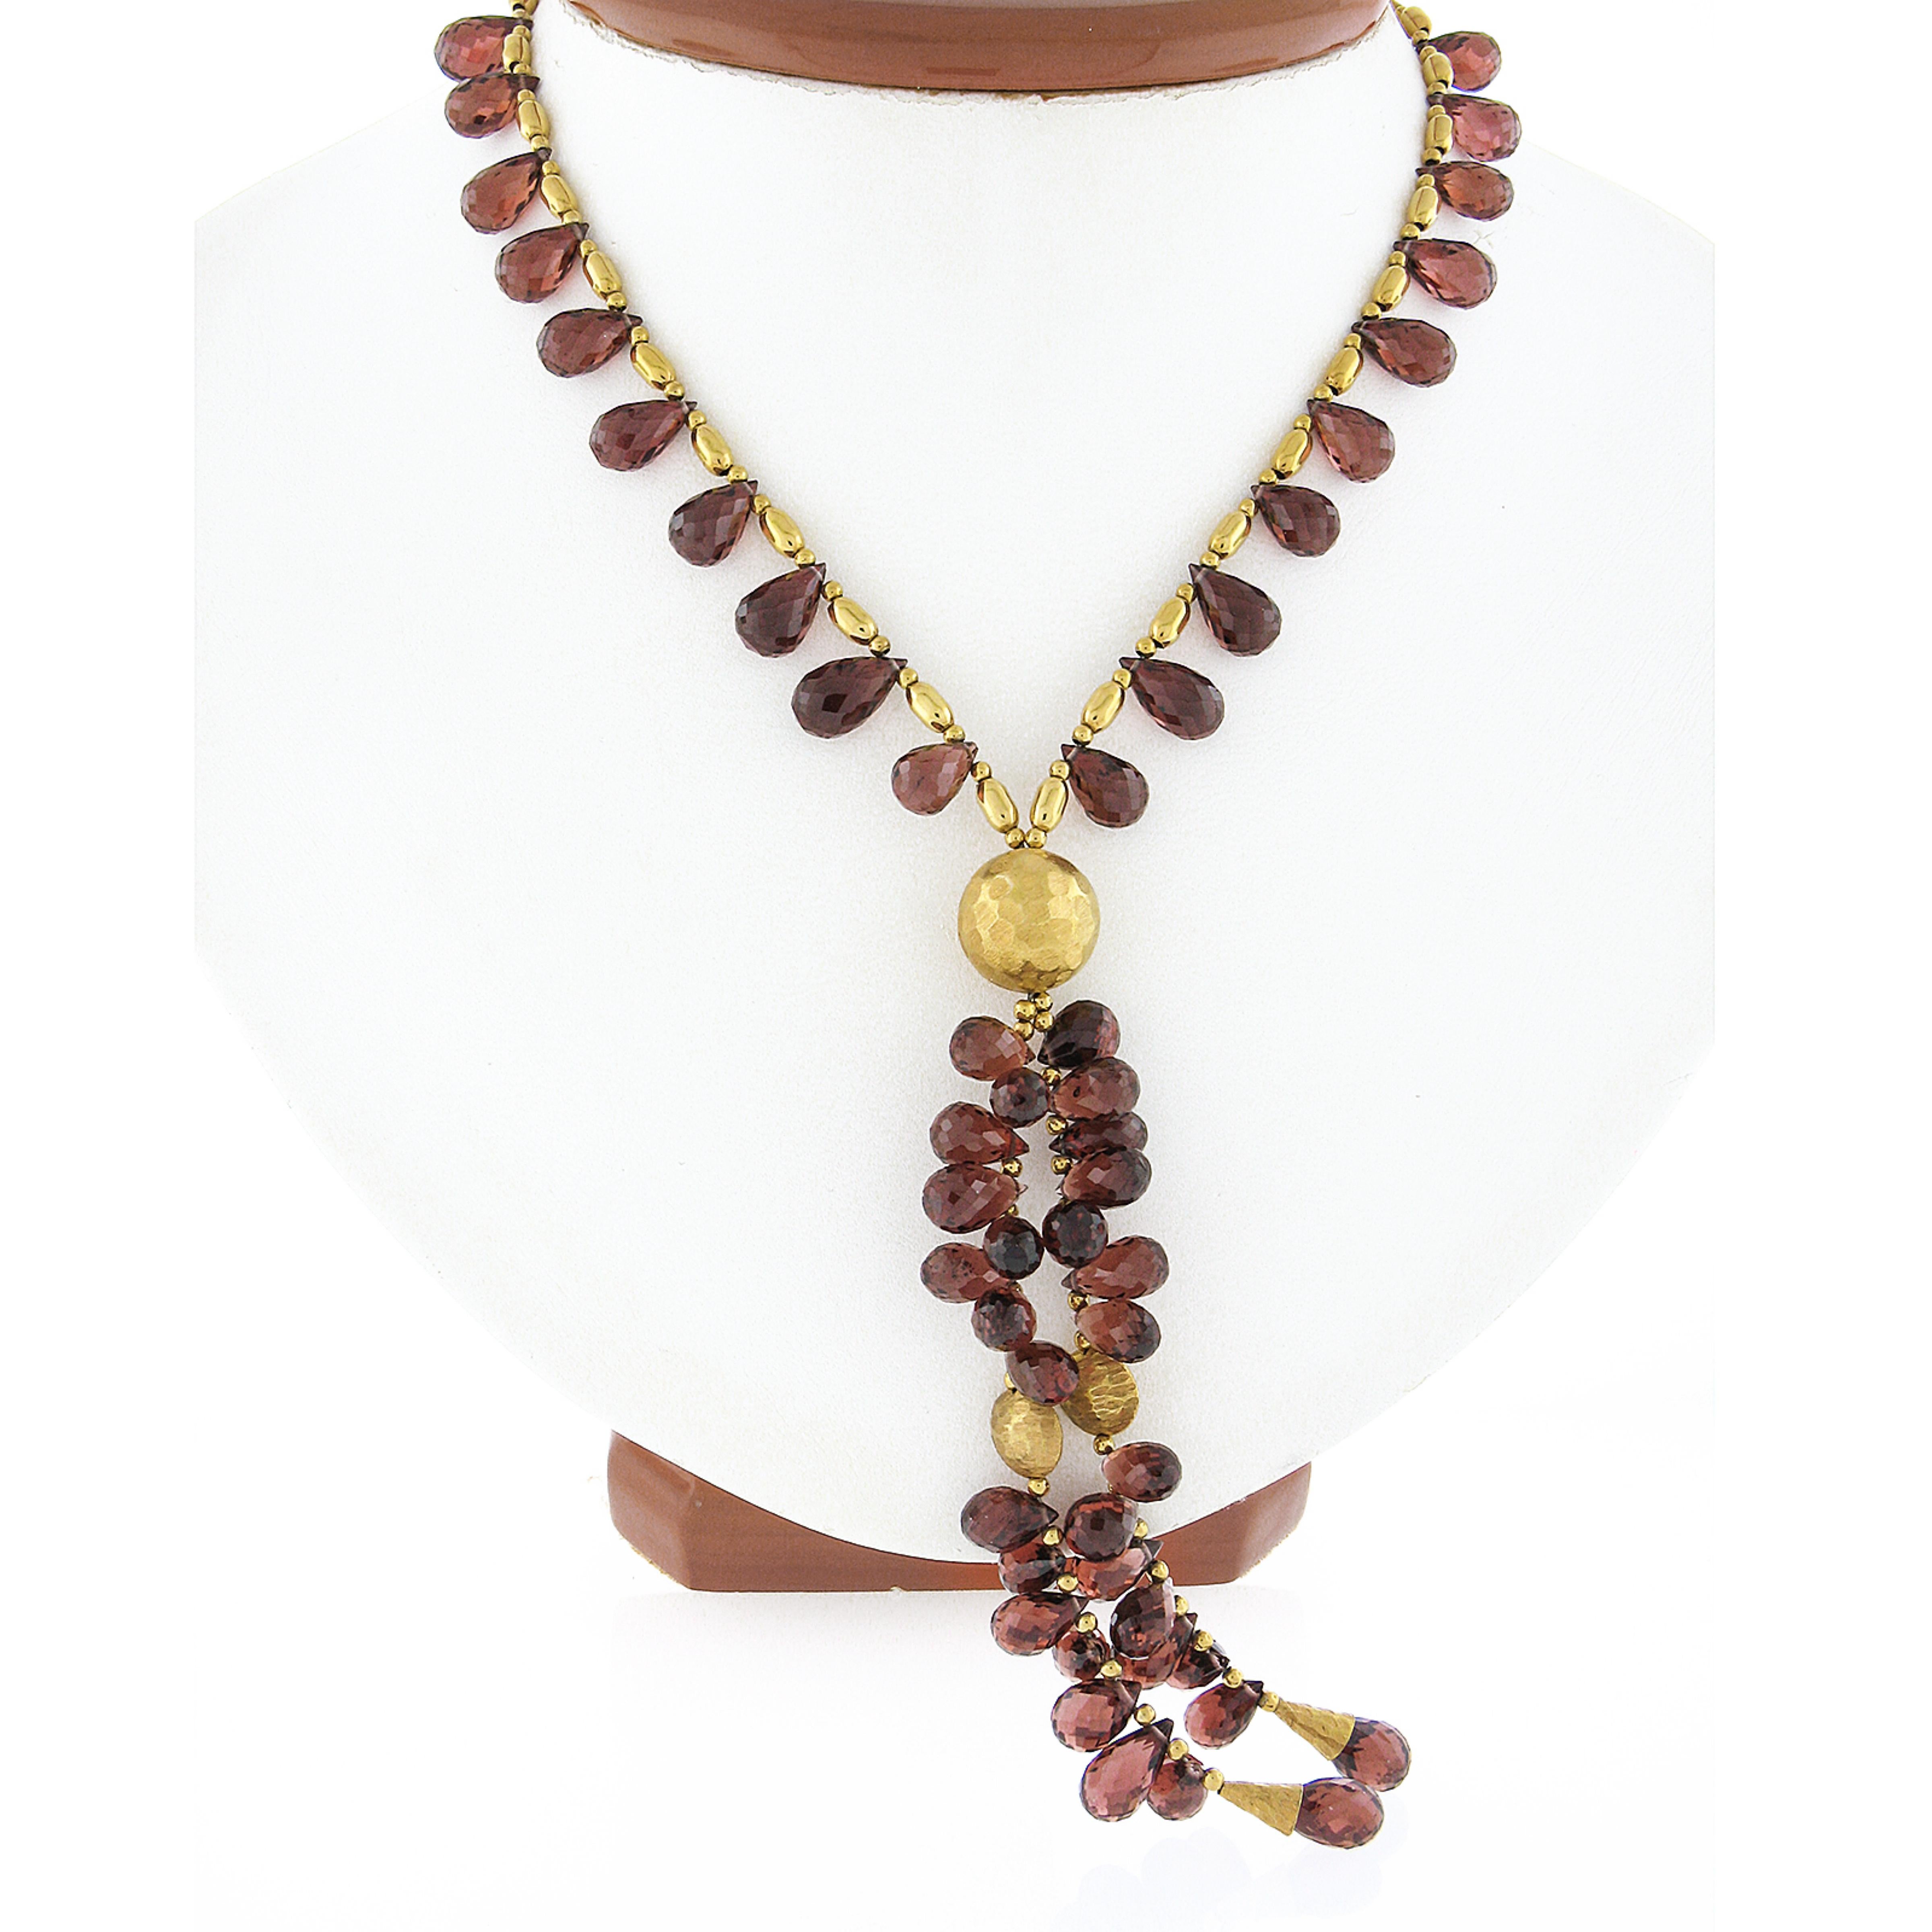 This gorgeous garnet bead necklace was crafted from solid 14k yellow gold. The necklace features polished and hammered finish gold beads that are wire strung with numerous tear drop shaped briolette cut garnet beads throughout. Those stones display